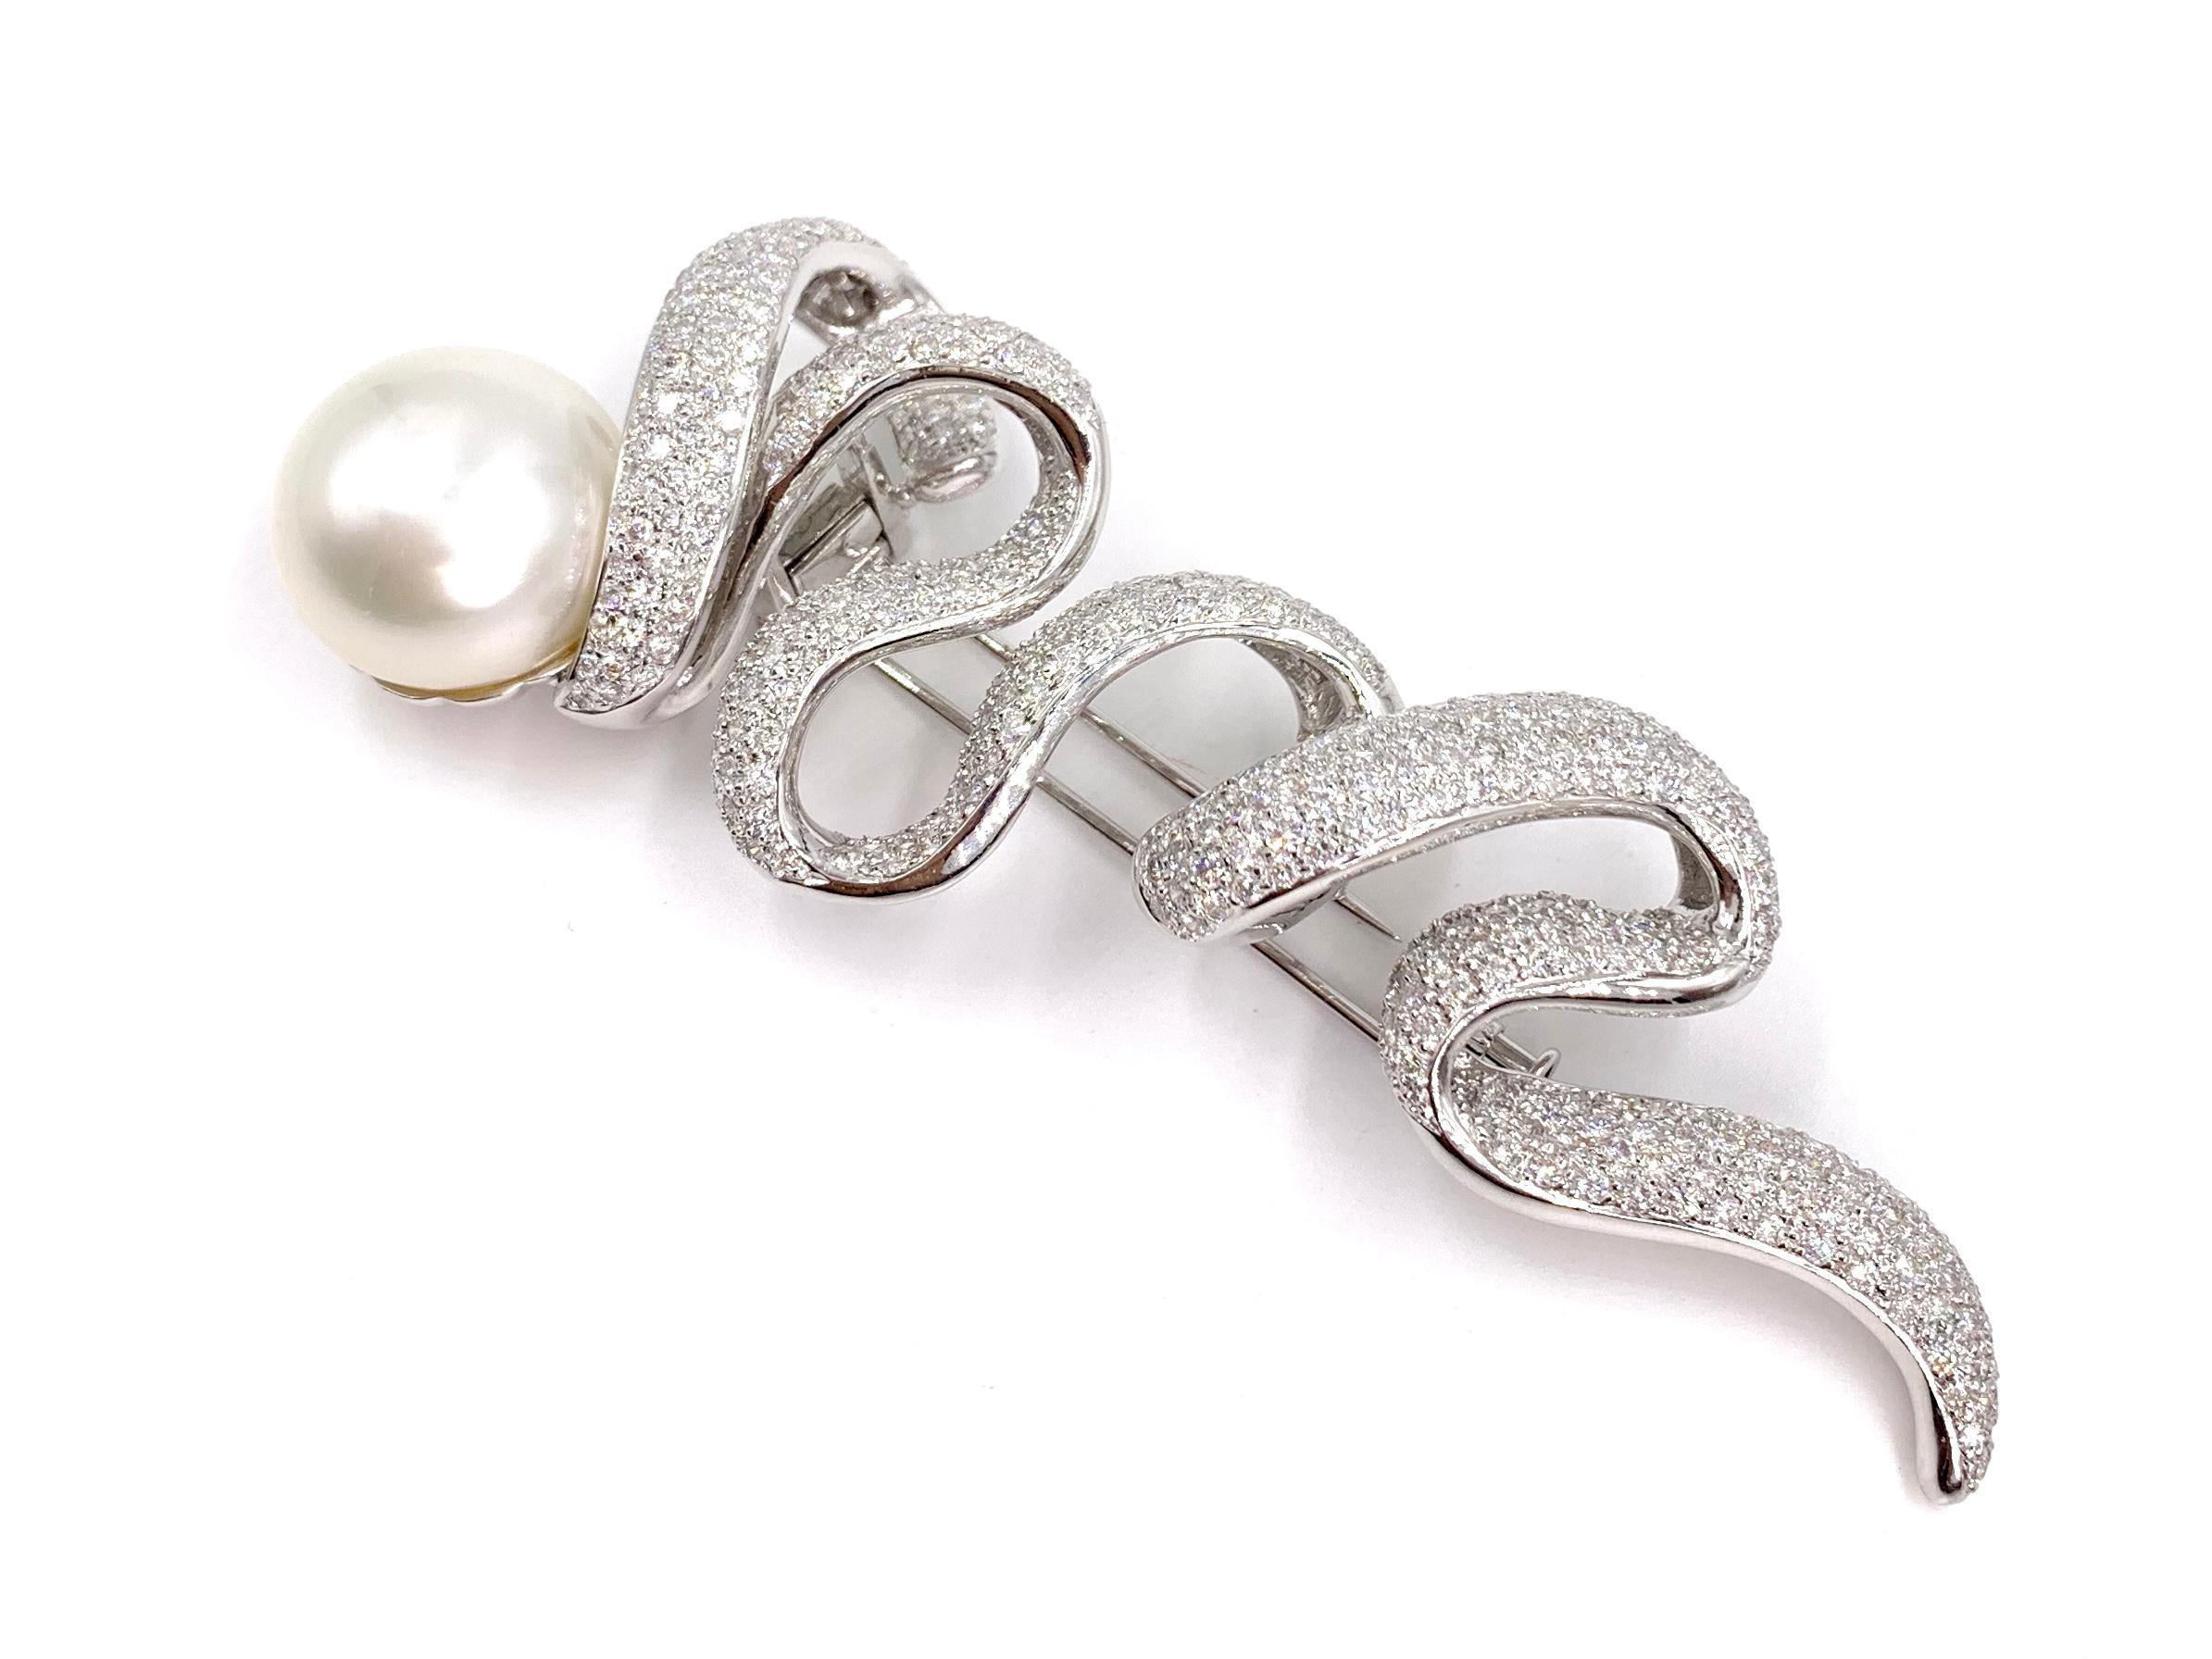 A fabulous, uniquely designed large brooch featuring a genuine white 17.3mm south sea pearl and white diamonds with a generous amount of sparkle. 6.89 carats of bright white diamonds are expertly pave set in polished 18 karat white gold in a